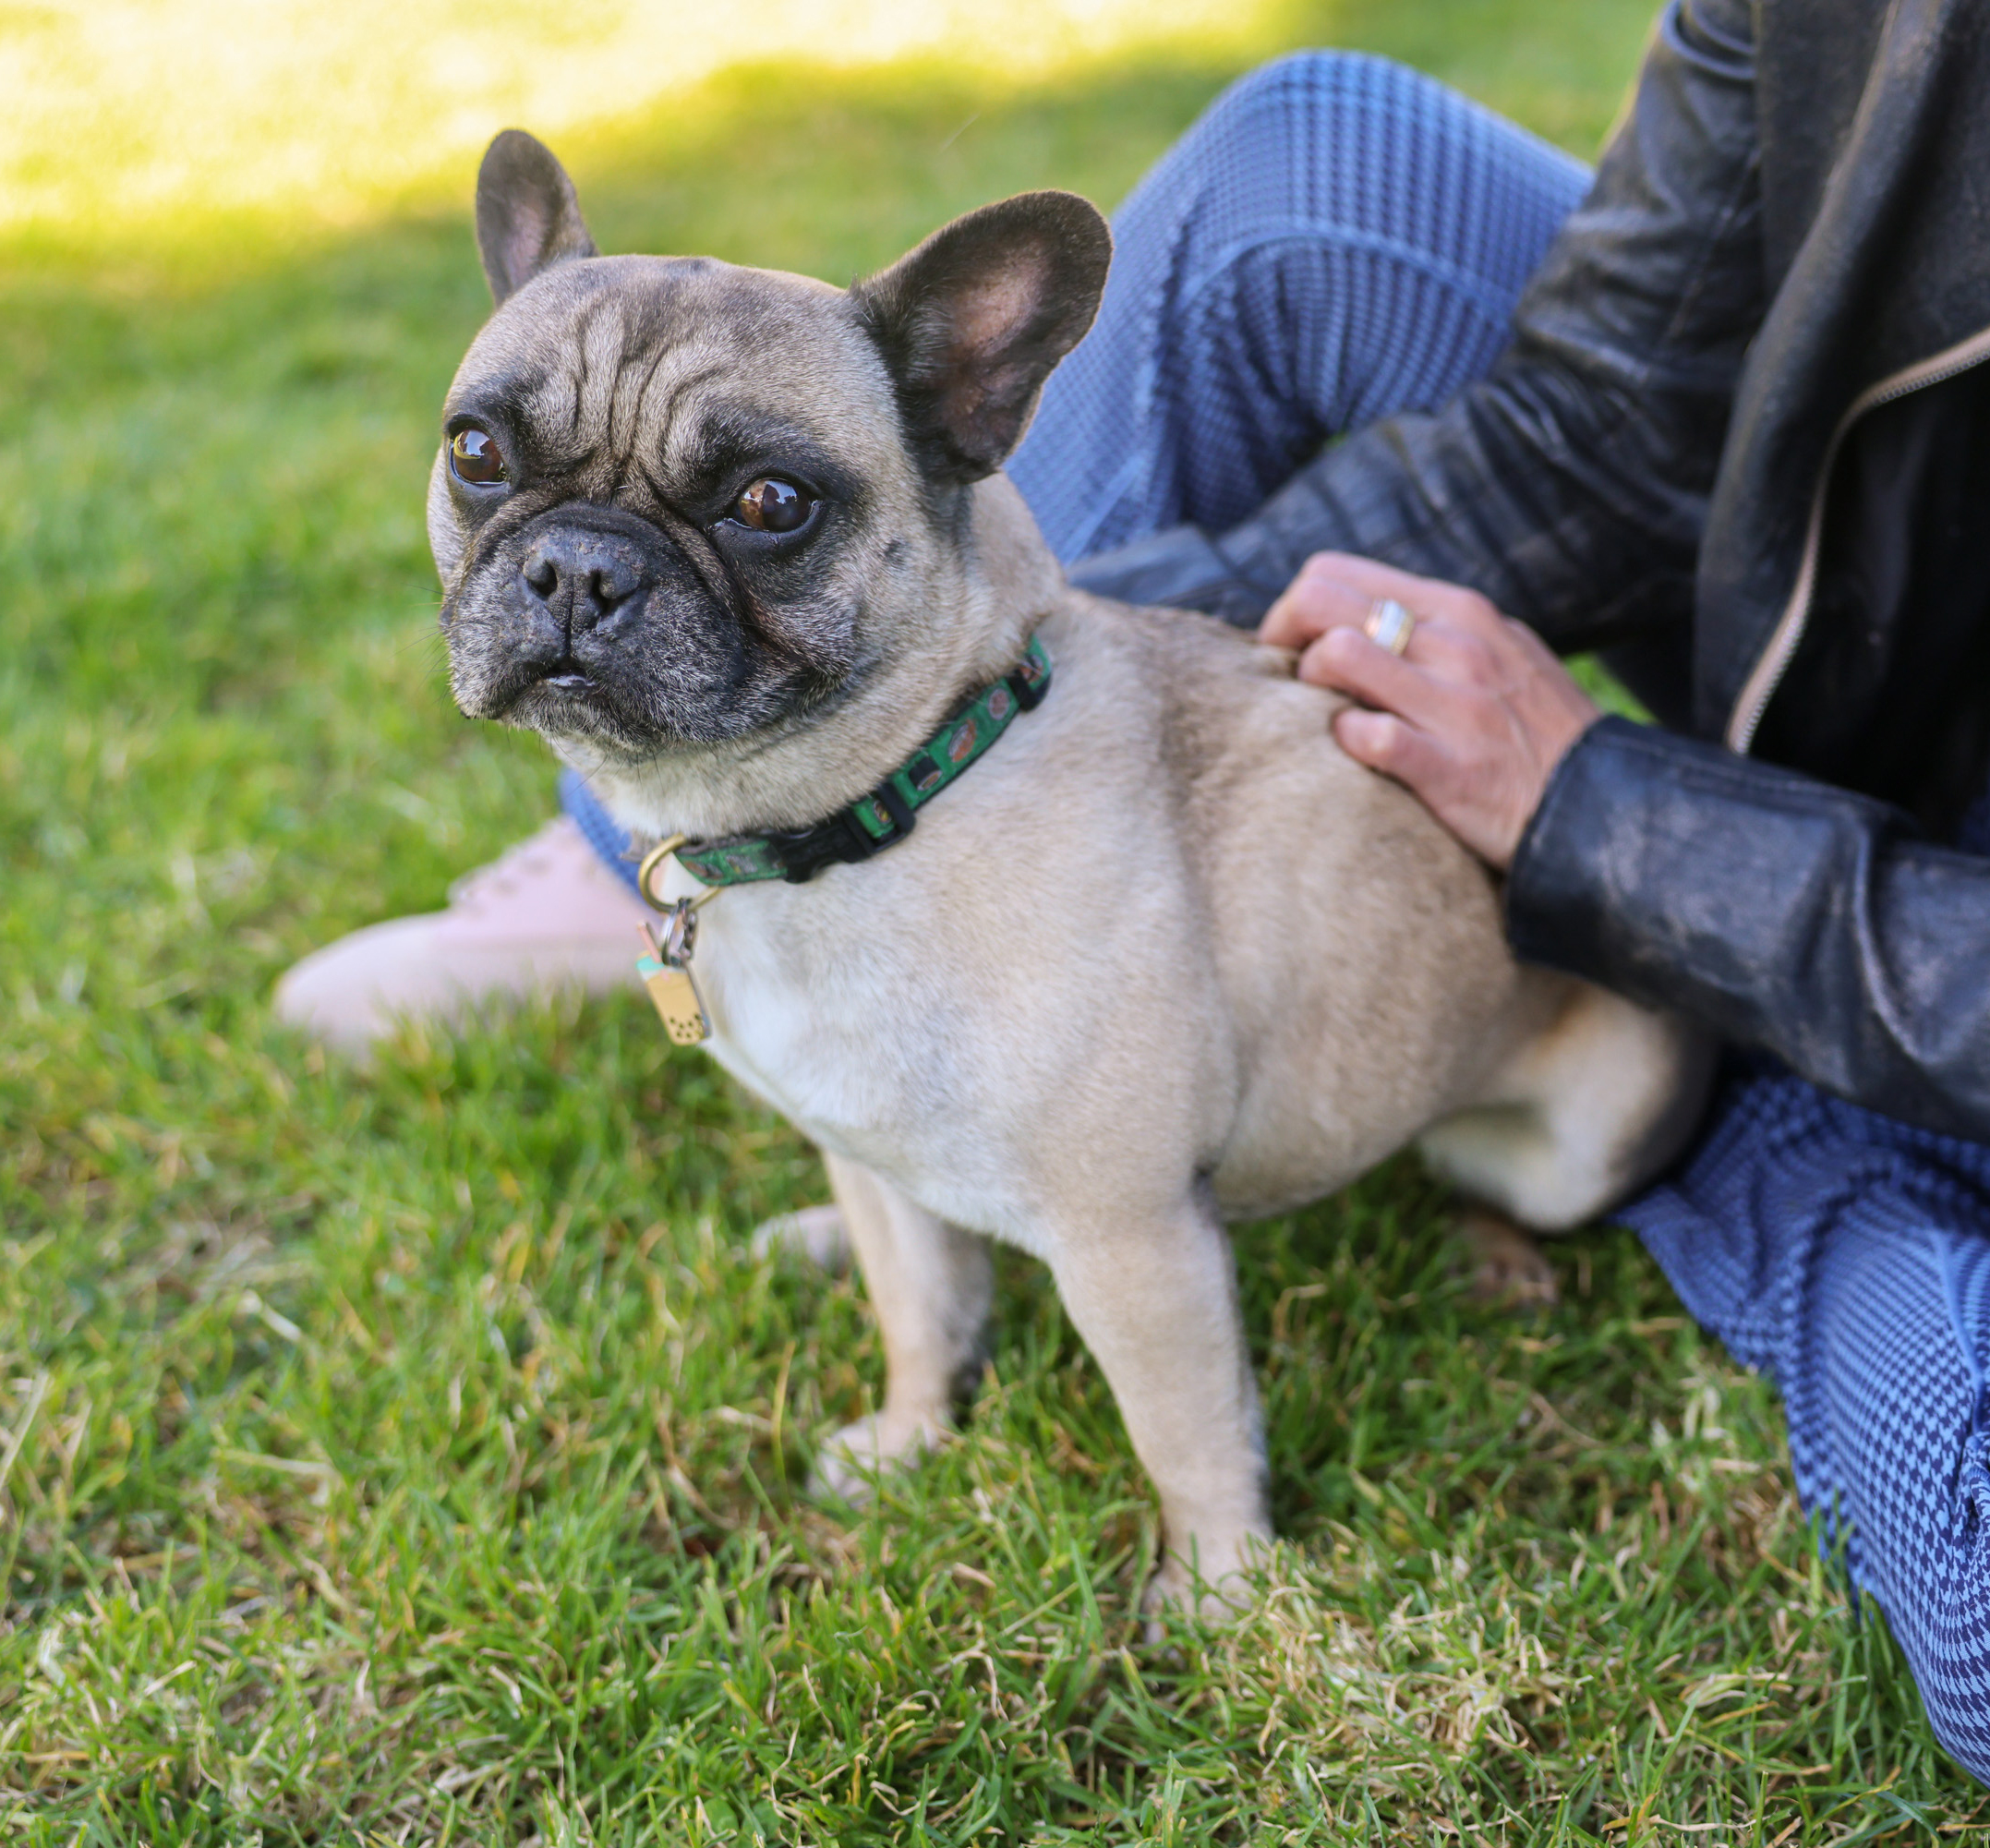 A pug sits on grass next to a person, who's petting it. The dog looks attentive, wearing a collar, with a human's hand visible.